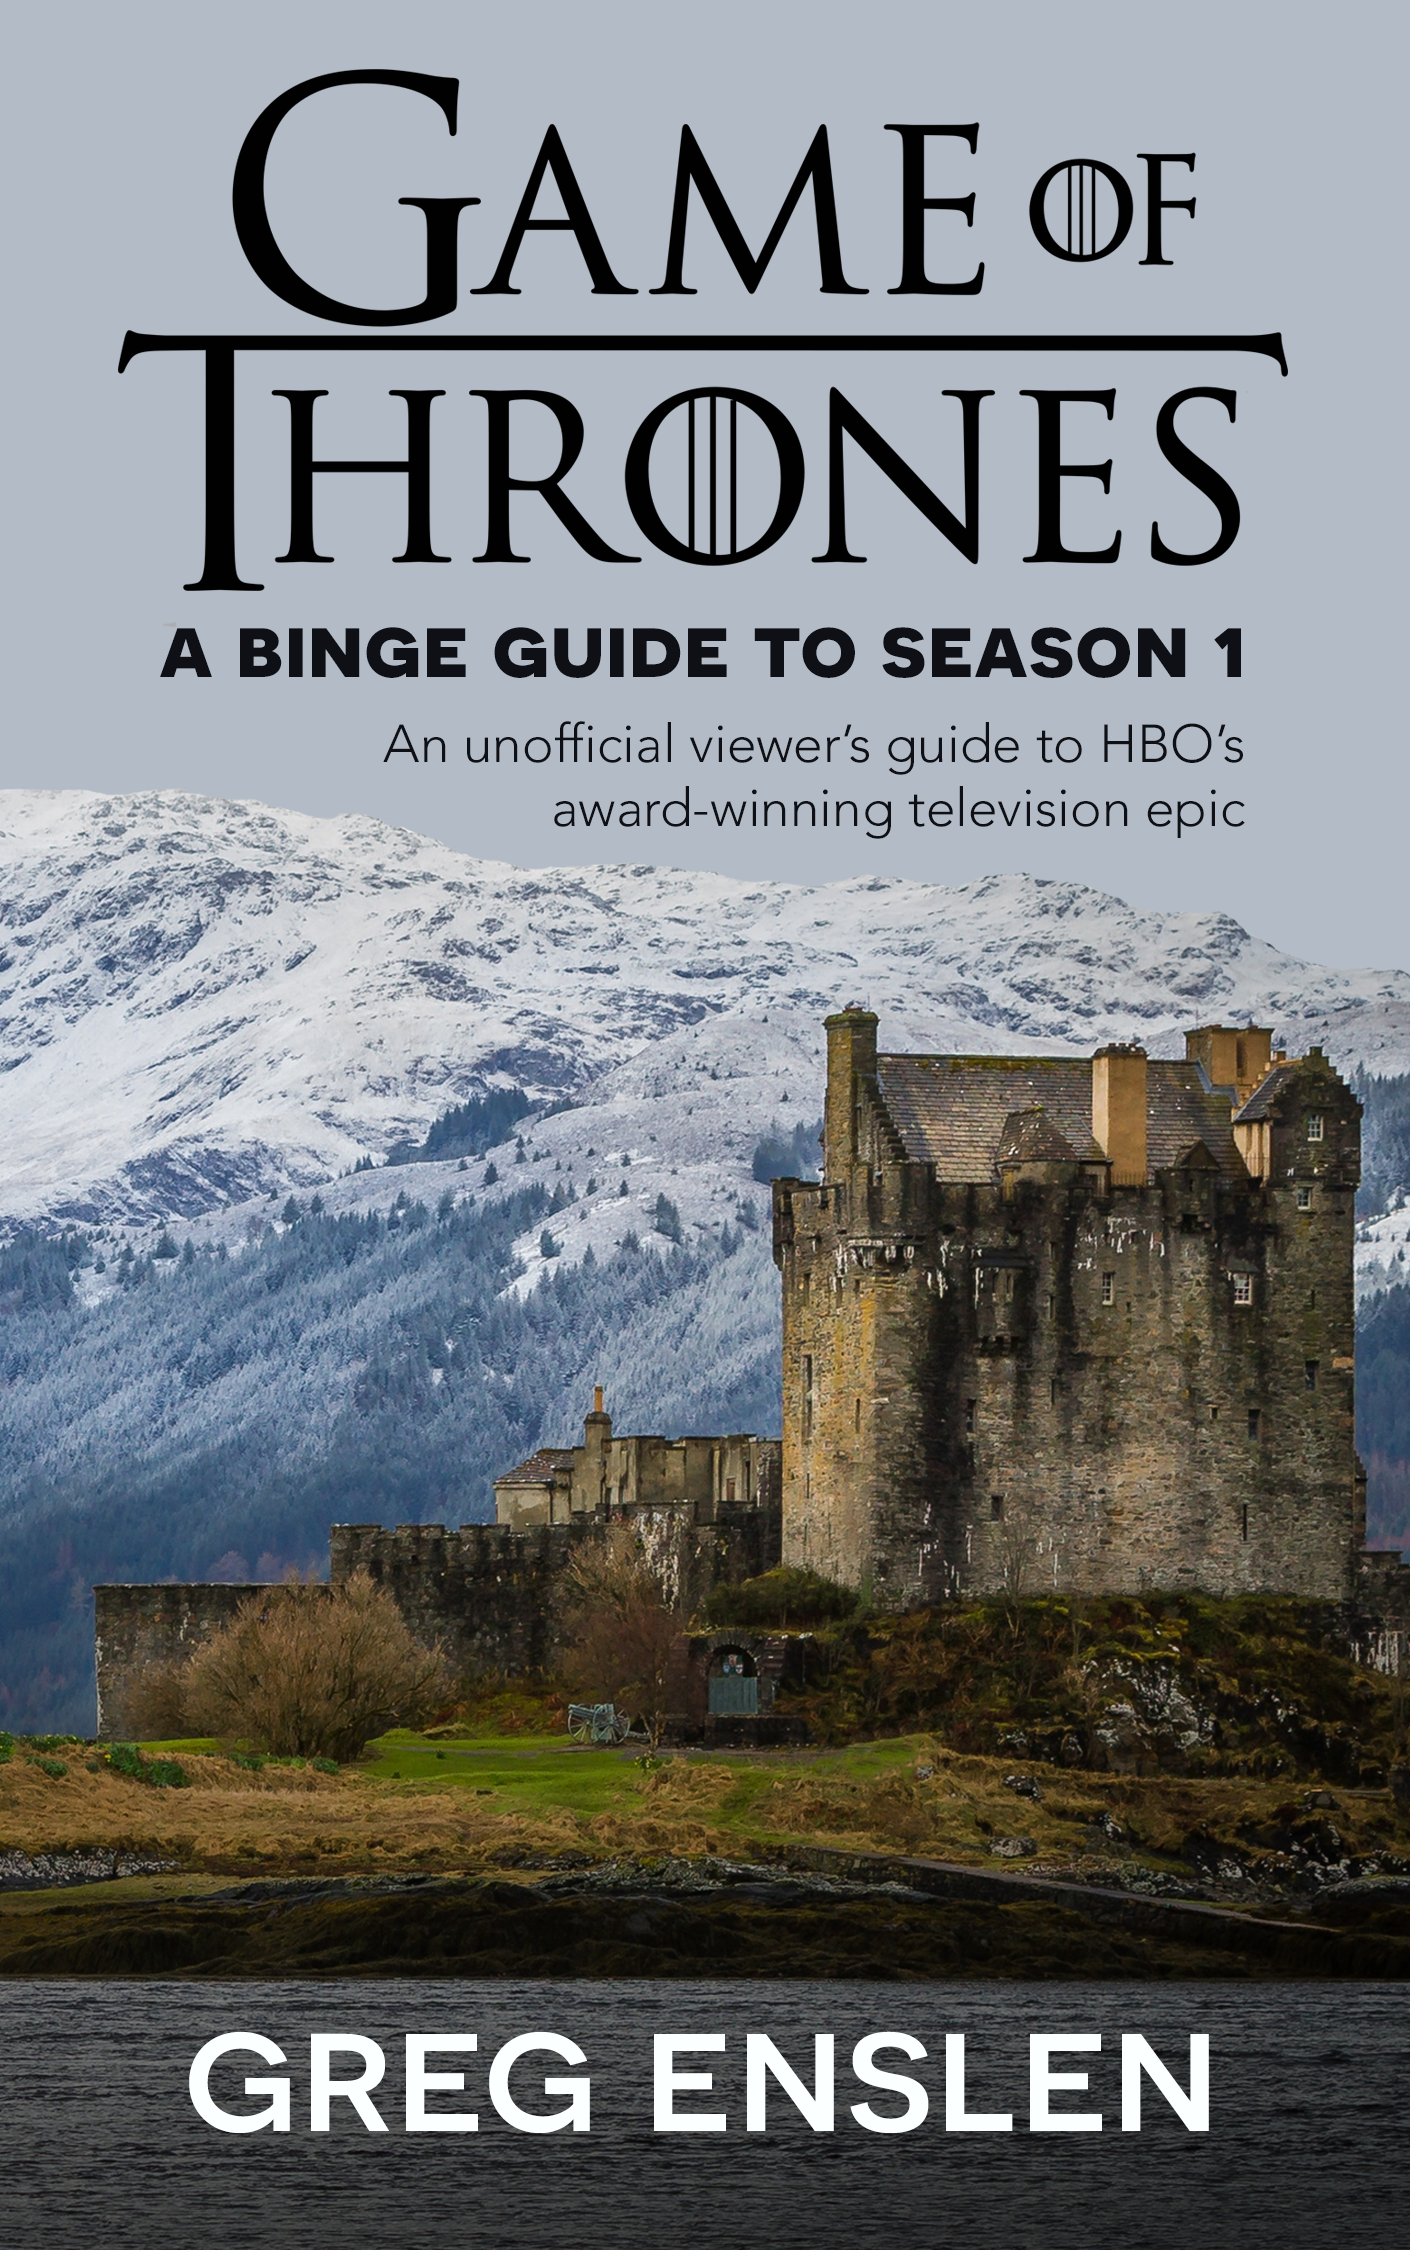 Game of Thrones: A Binge Guide to Season 1